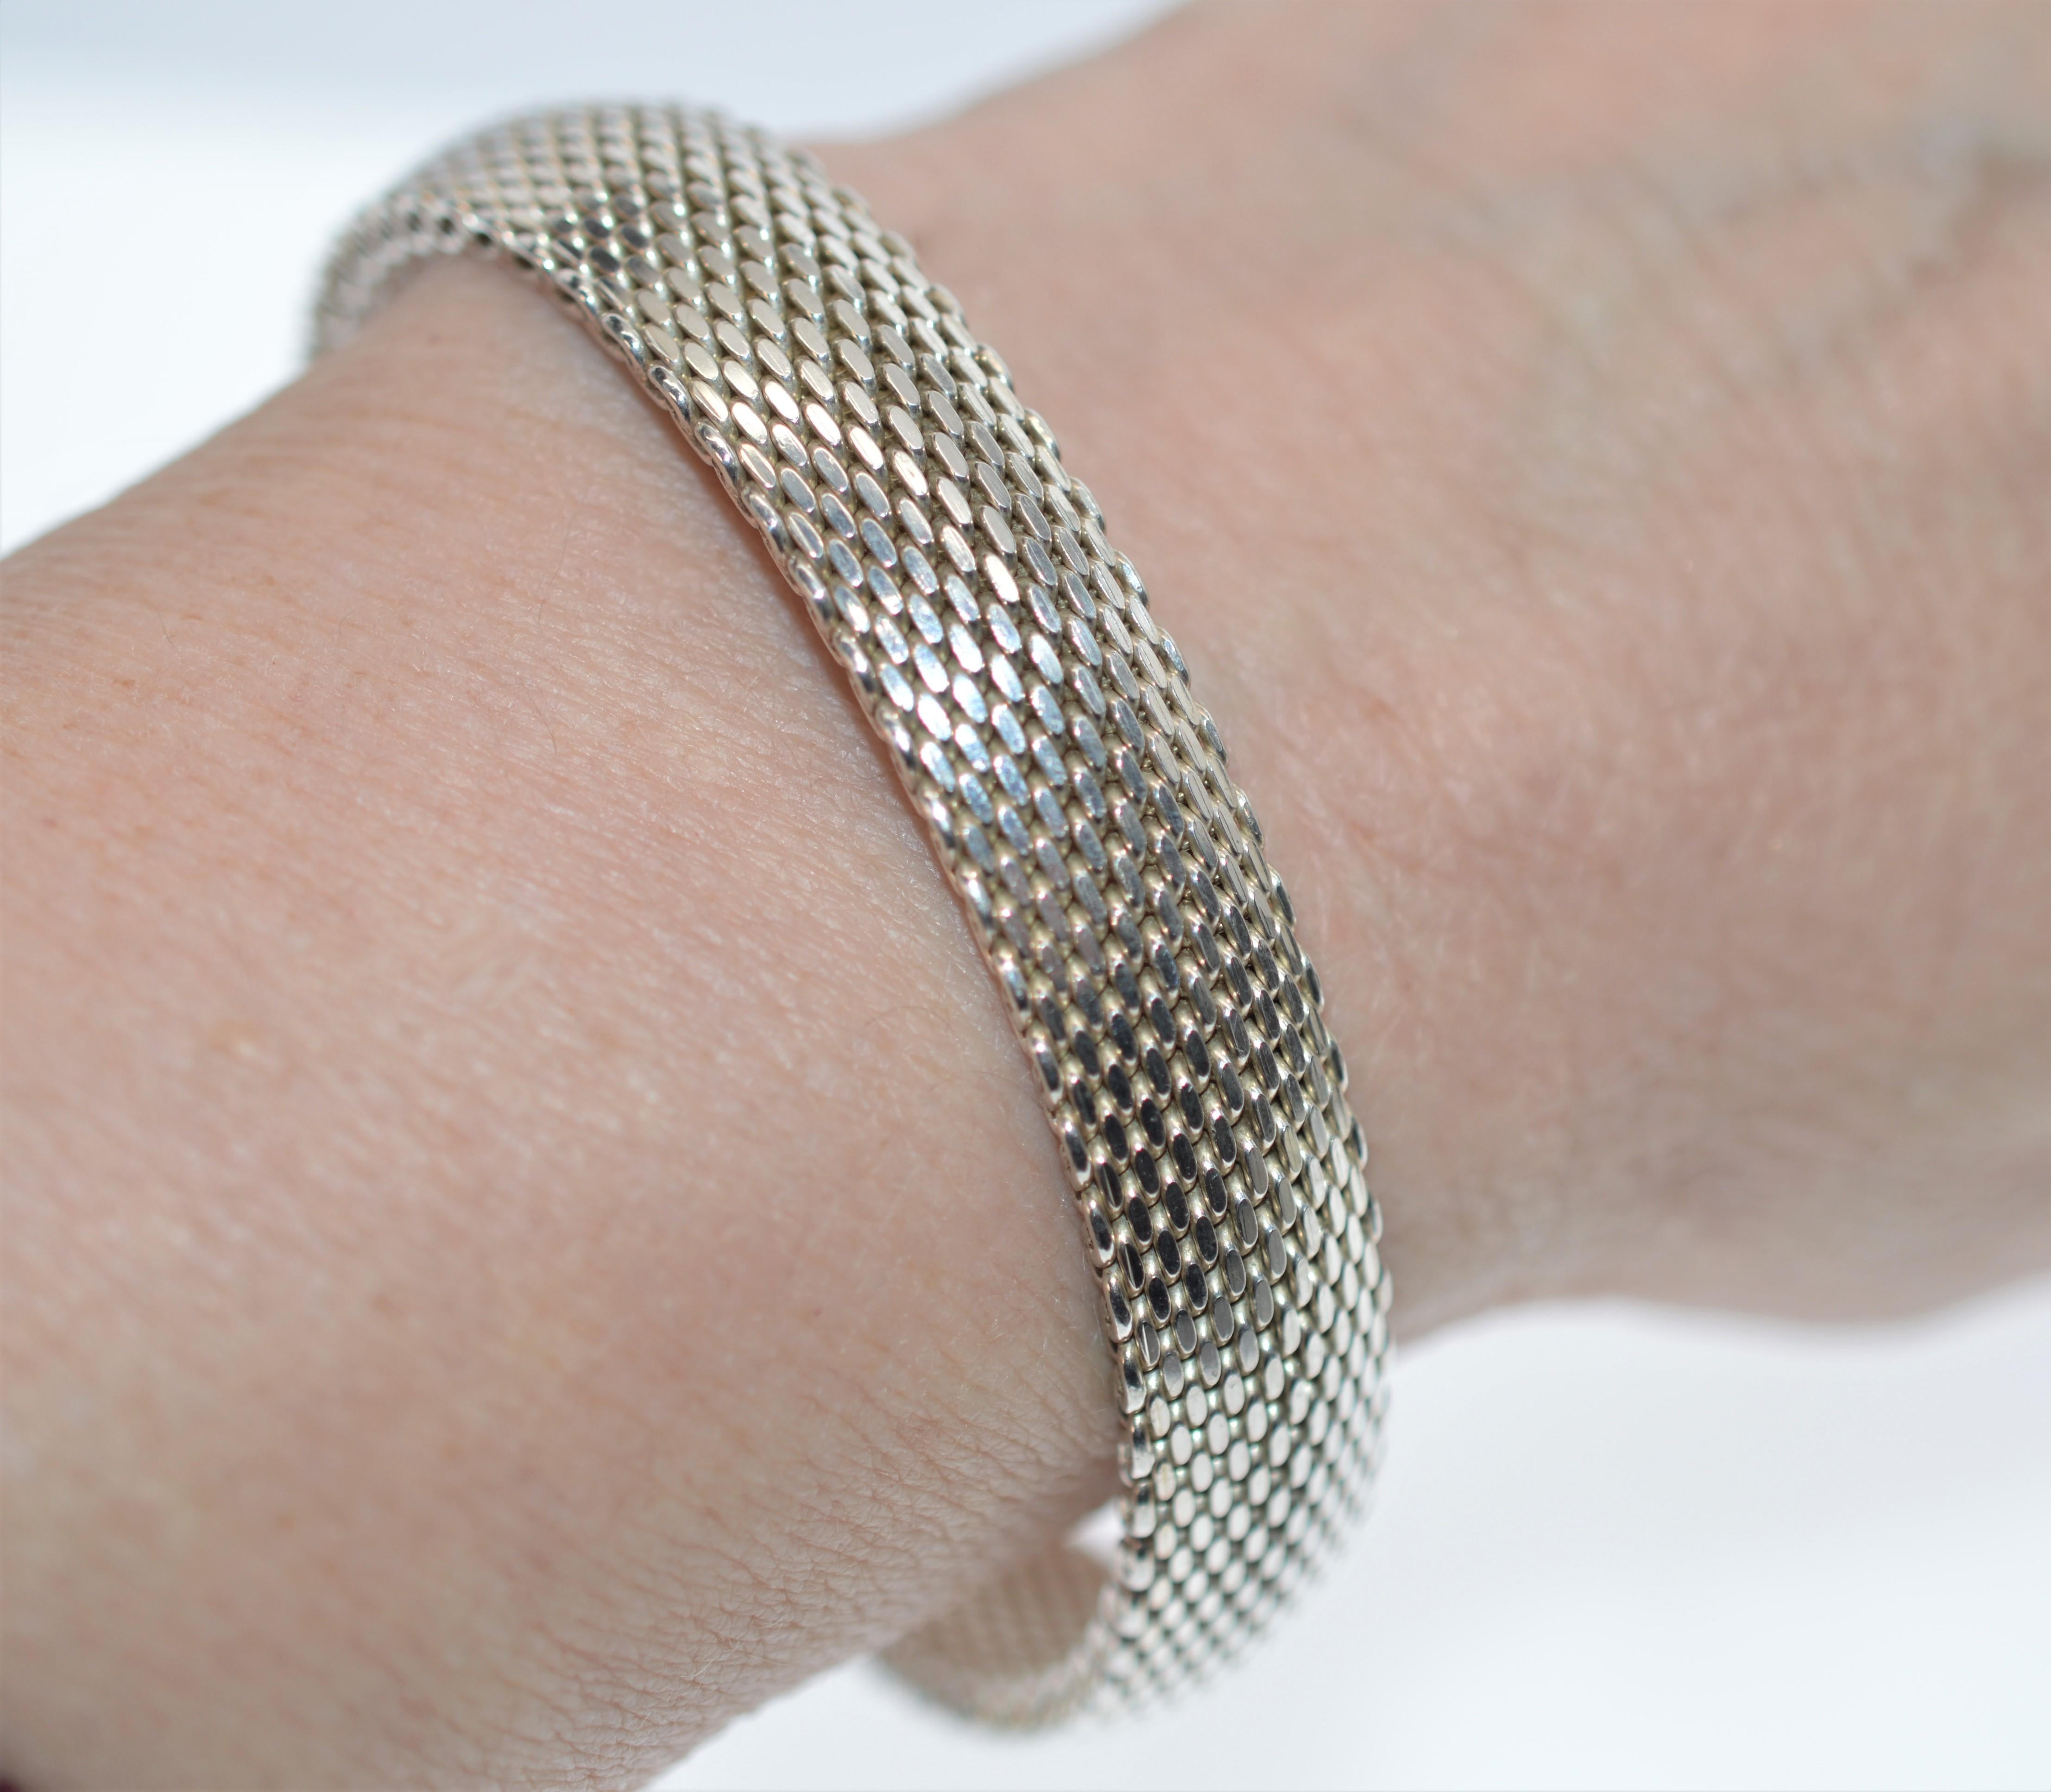 A sleek, modern look. Flexible and super comfortable to wear. Slips on and off, no clasps or catches and crafted one inch wide of woven Sterling Silver with a 2-1/2 inch diameter. In Gift Box.